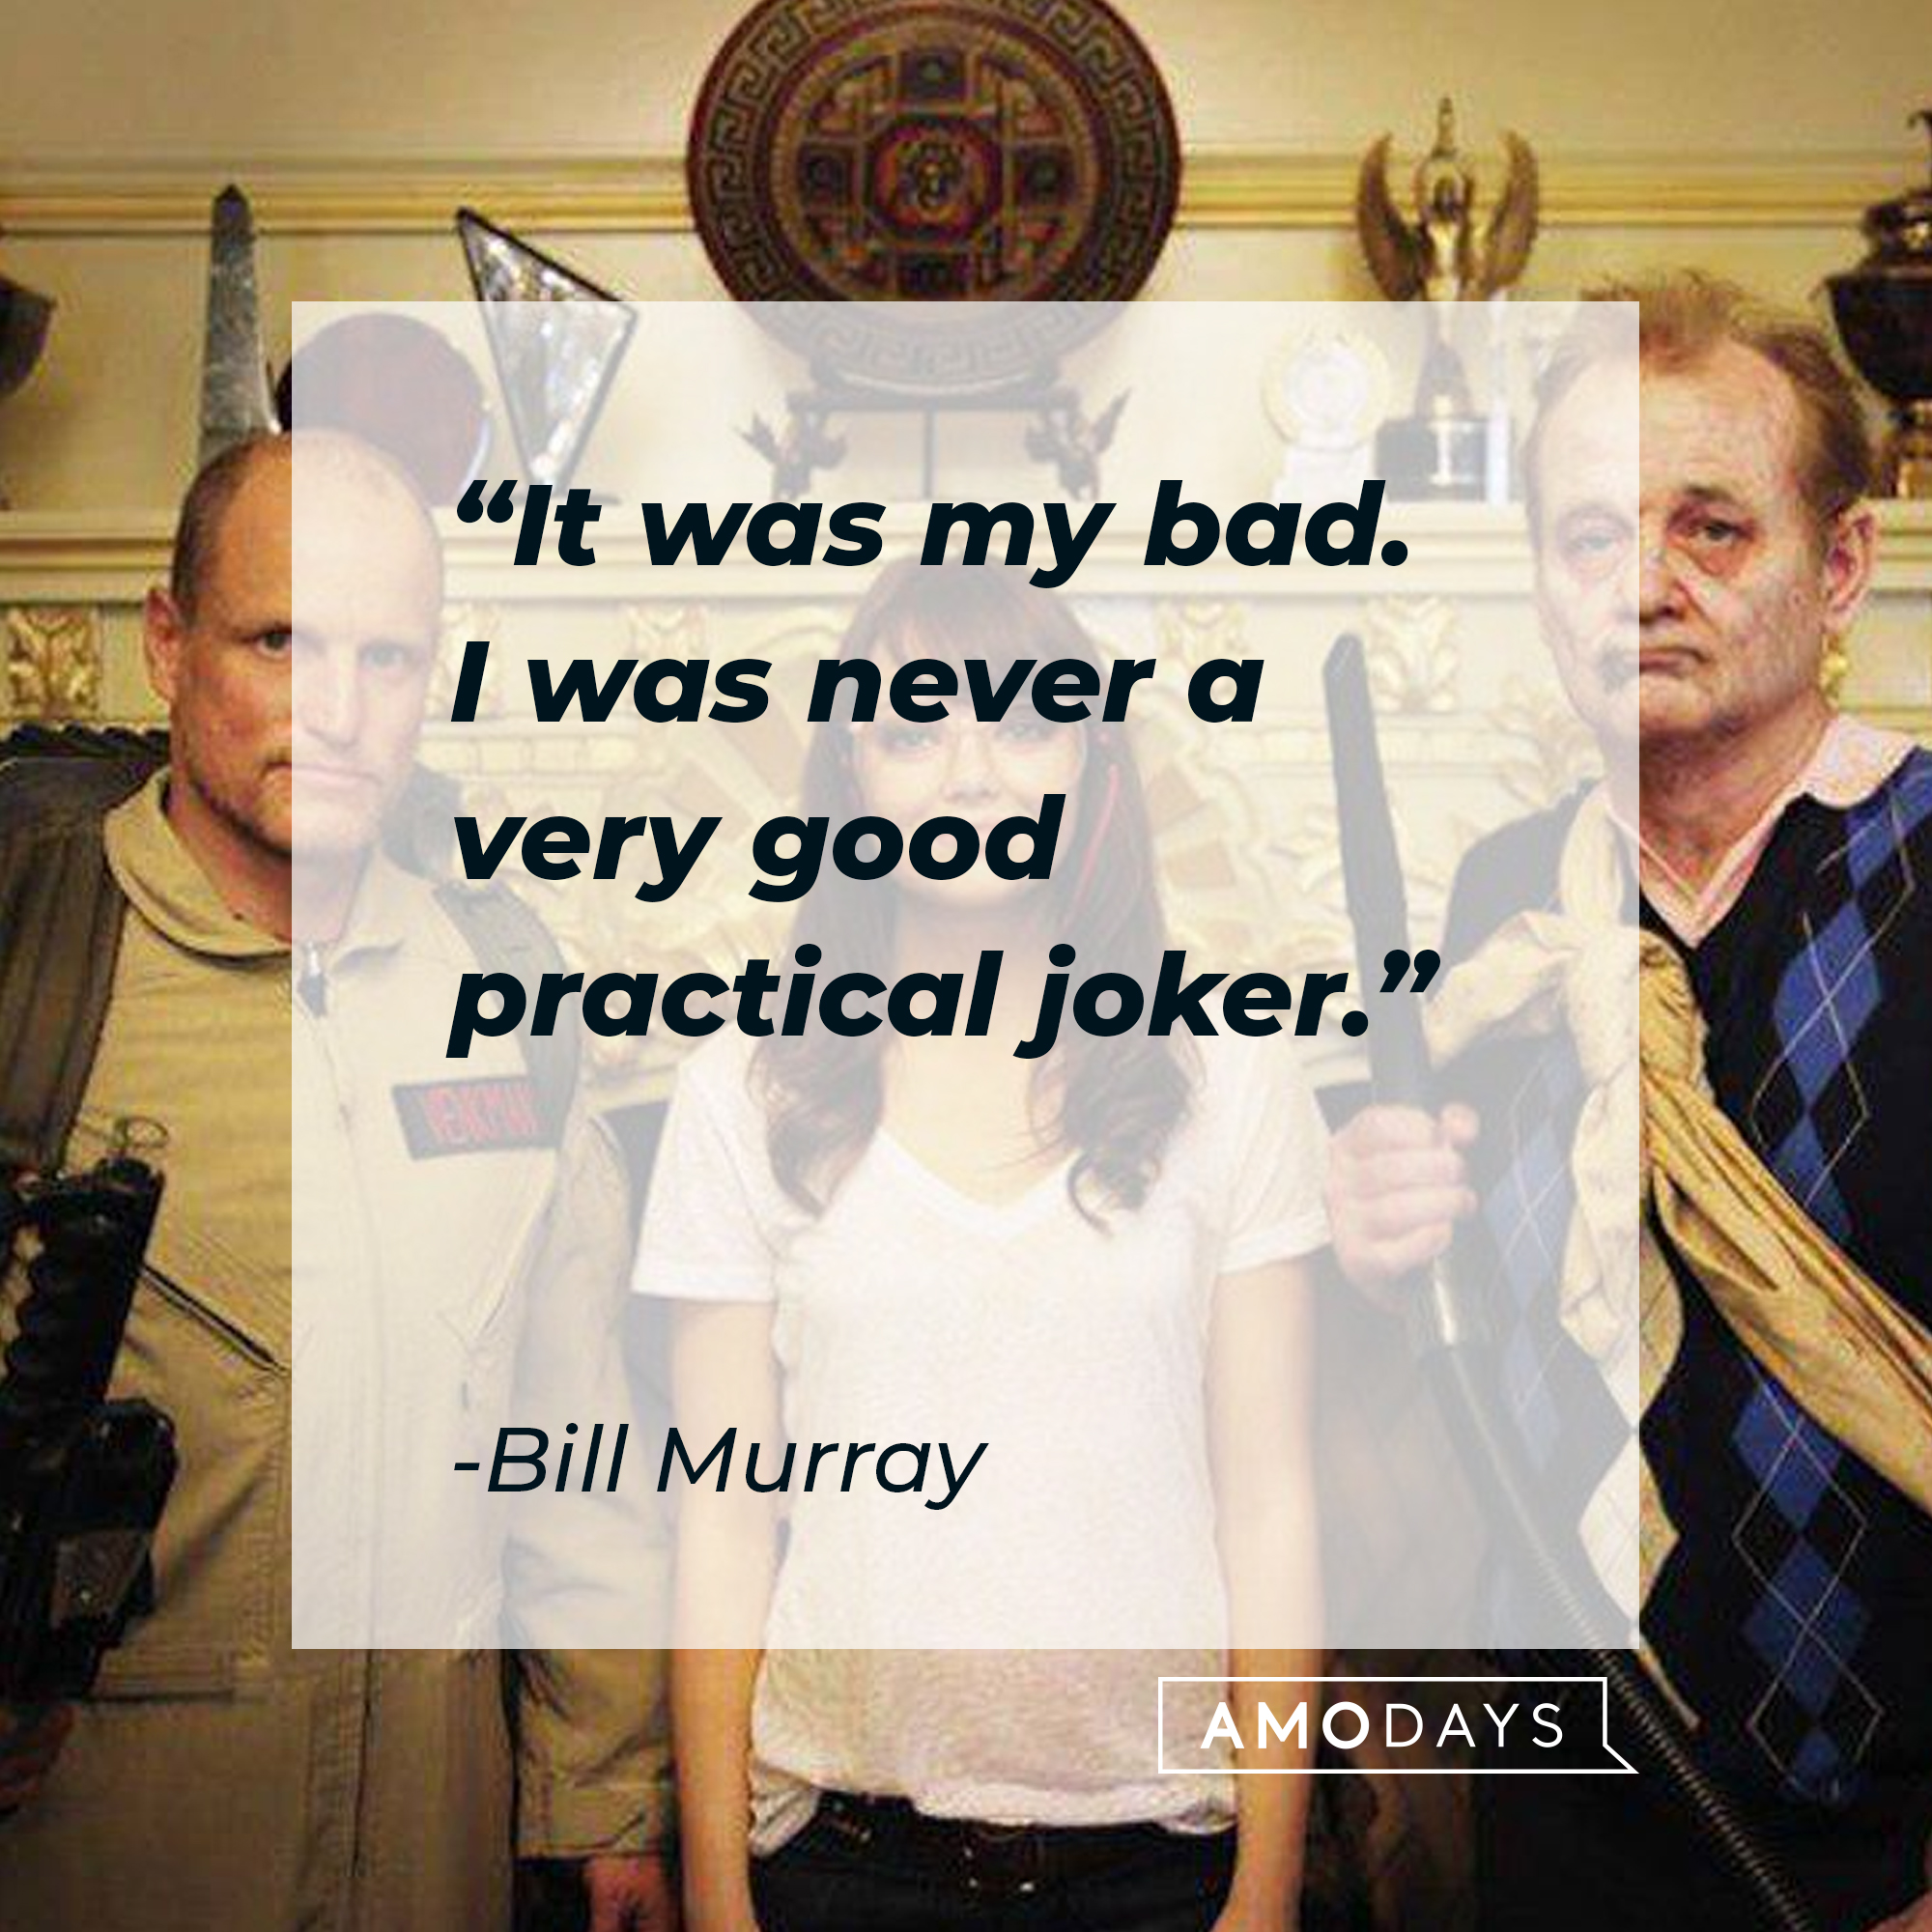 Bill Murray's quote: "It was my bad. I was never a very good practical joker." | Source: Facebook.com/Zombieland